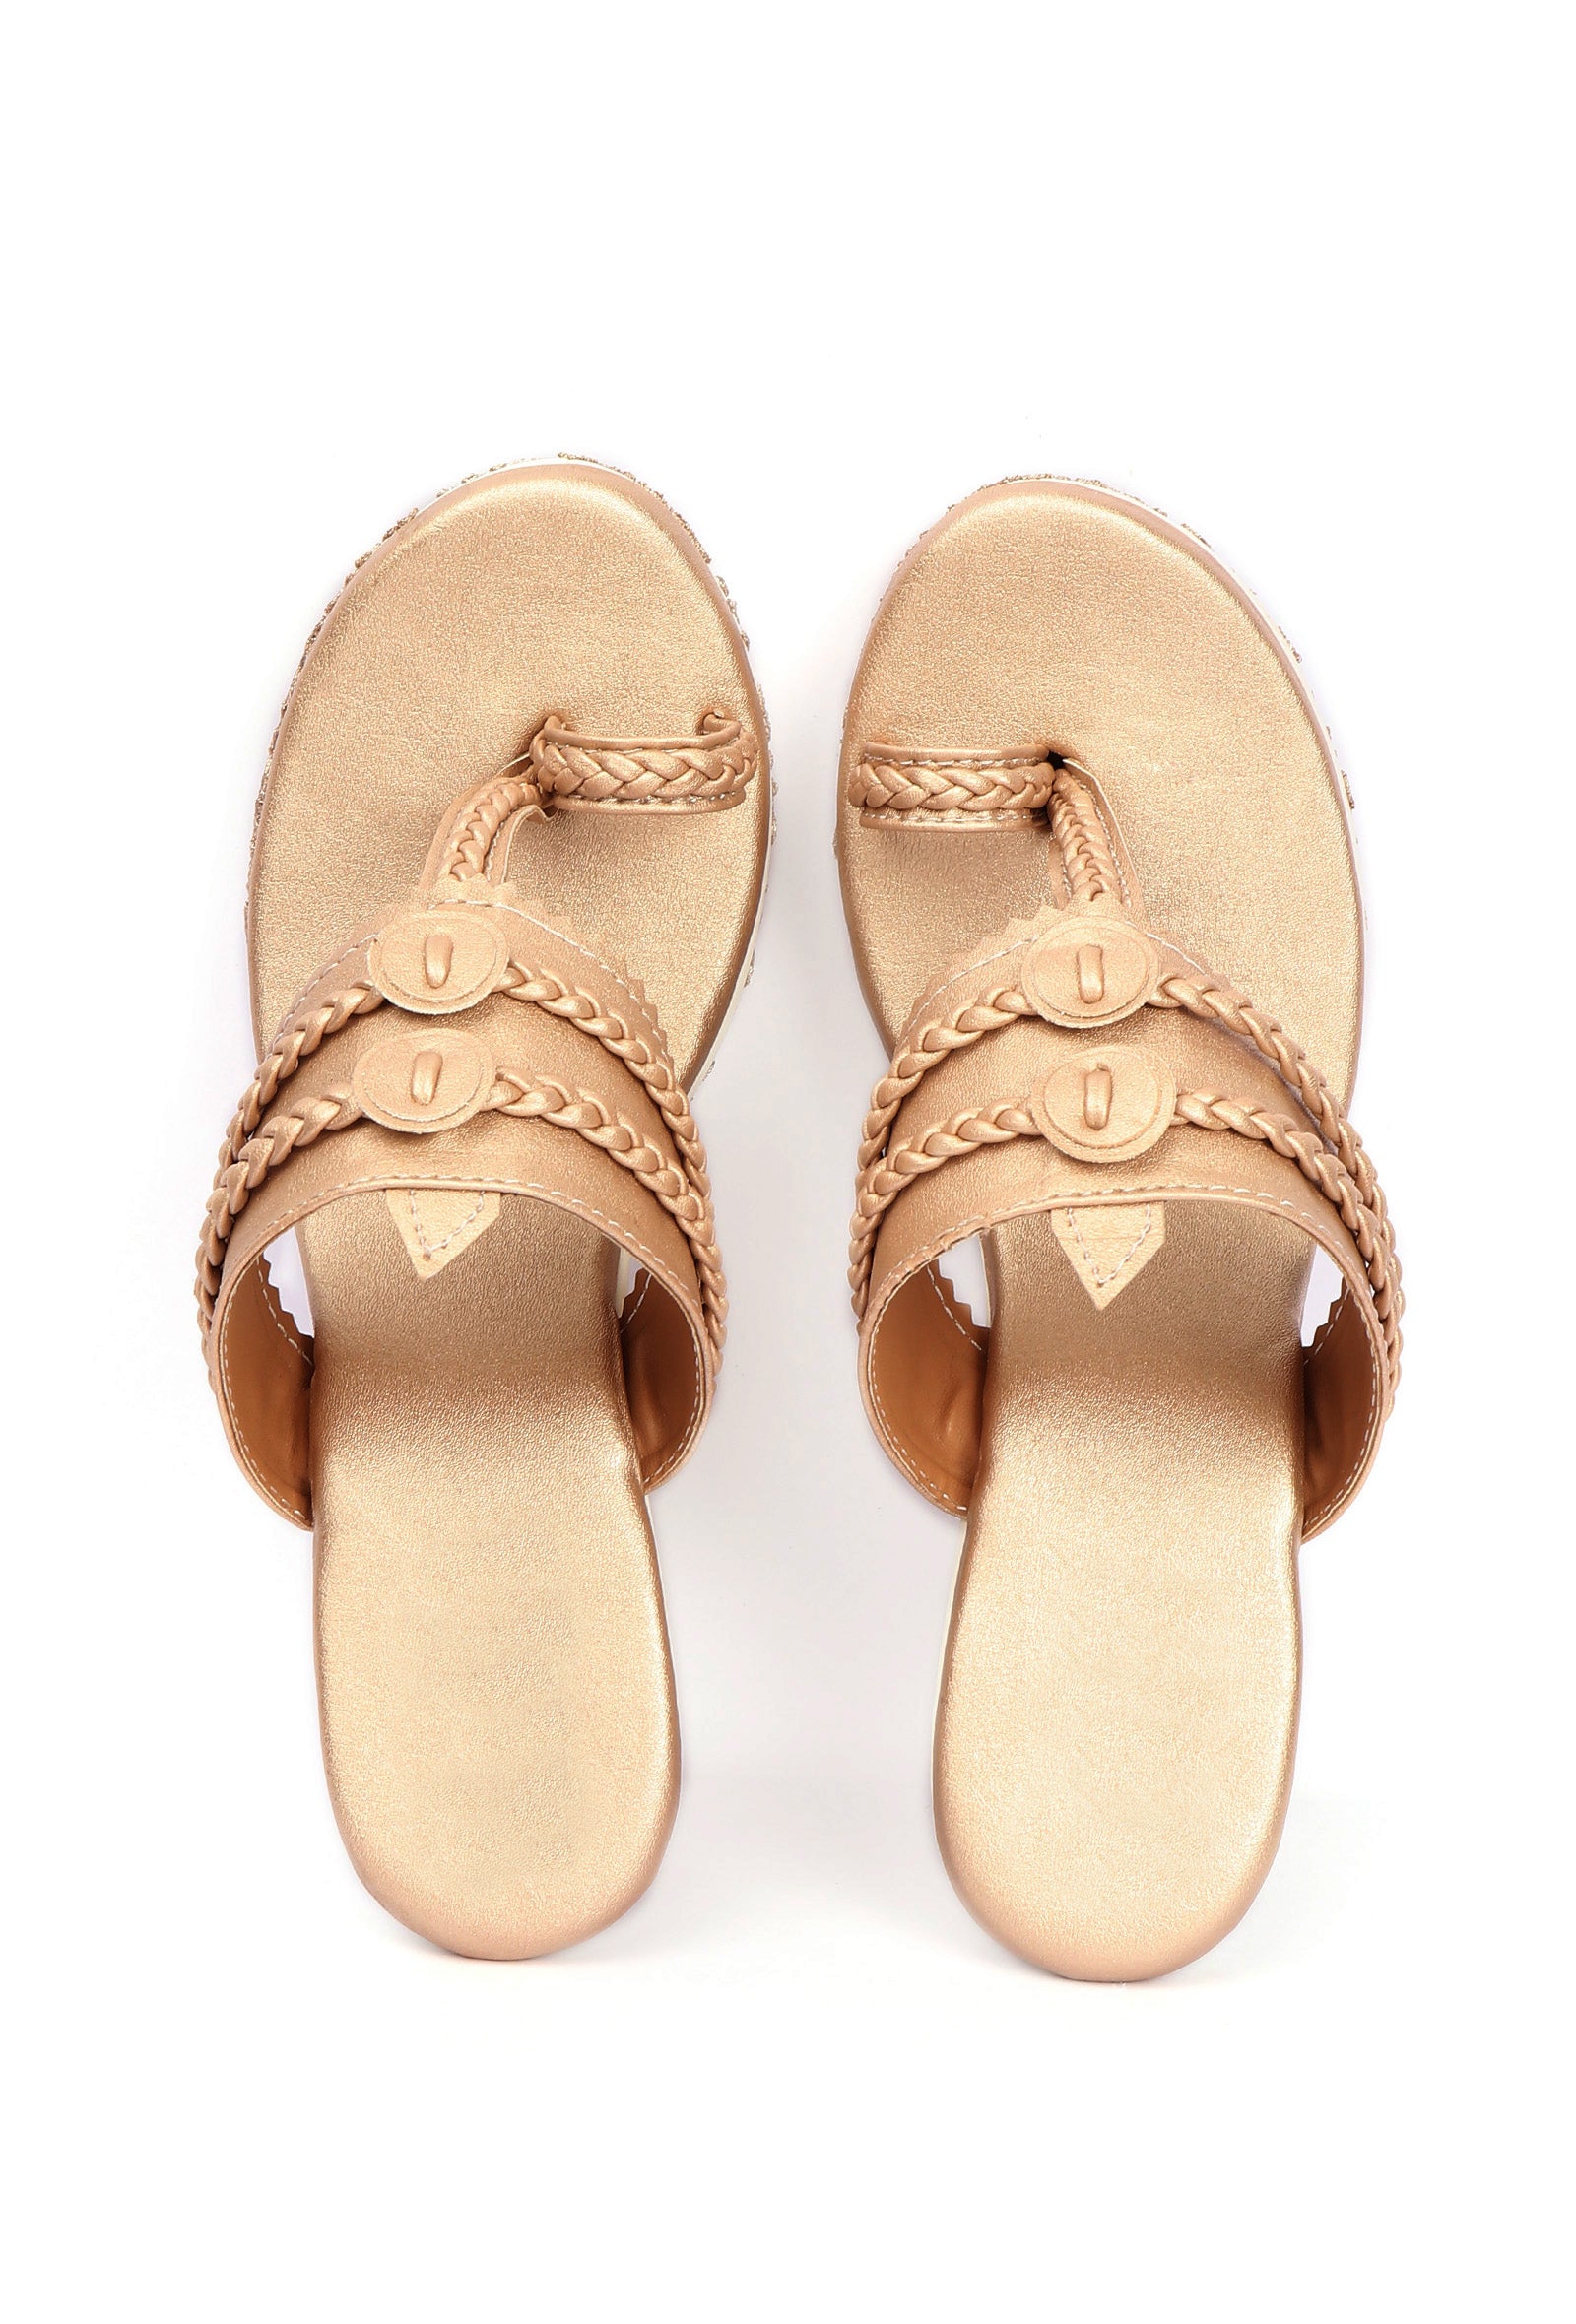 Zarina Golden Hand Embroidered Braided One Toe Wedges